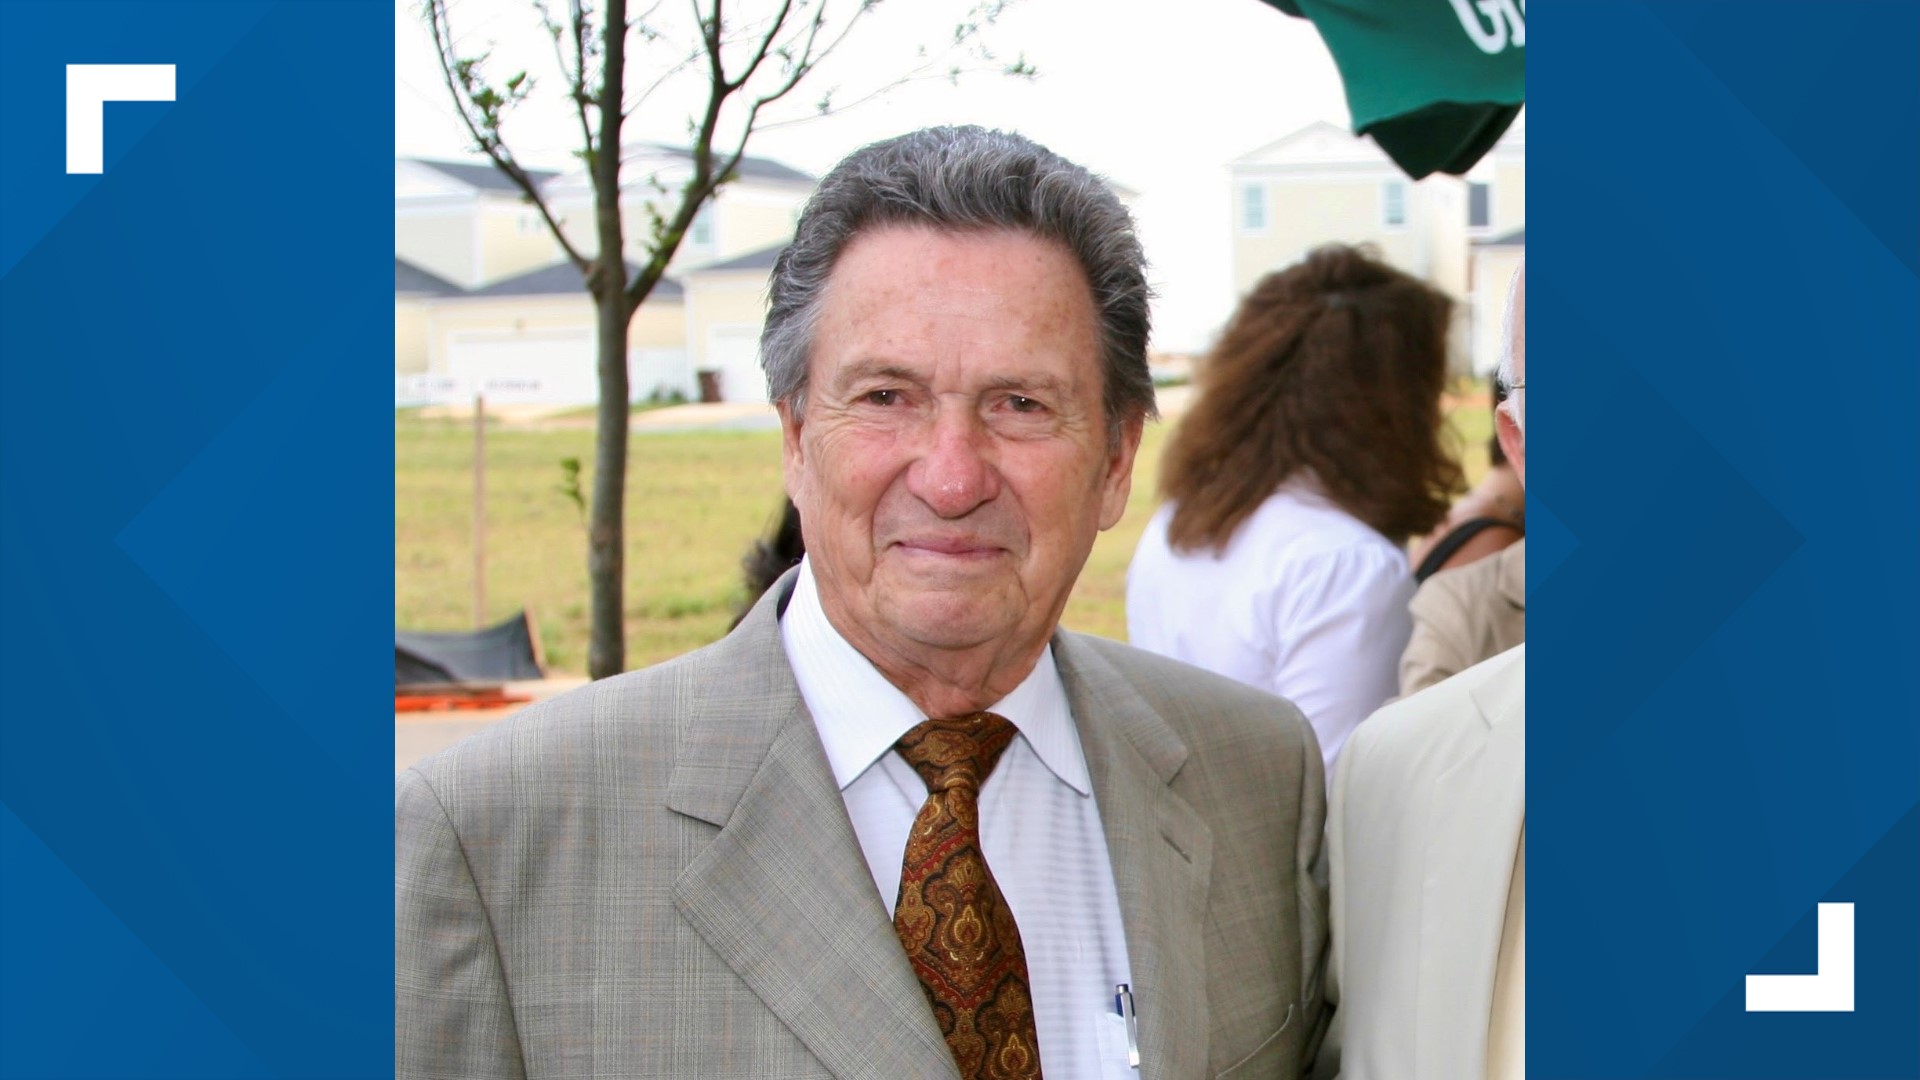 In 1997, Charles Osborn Jr. bought the 595 acre George Norton Farm and turned it into Norton Commons.